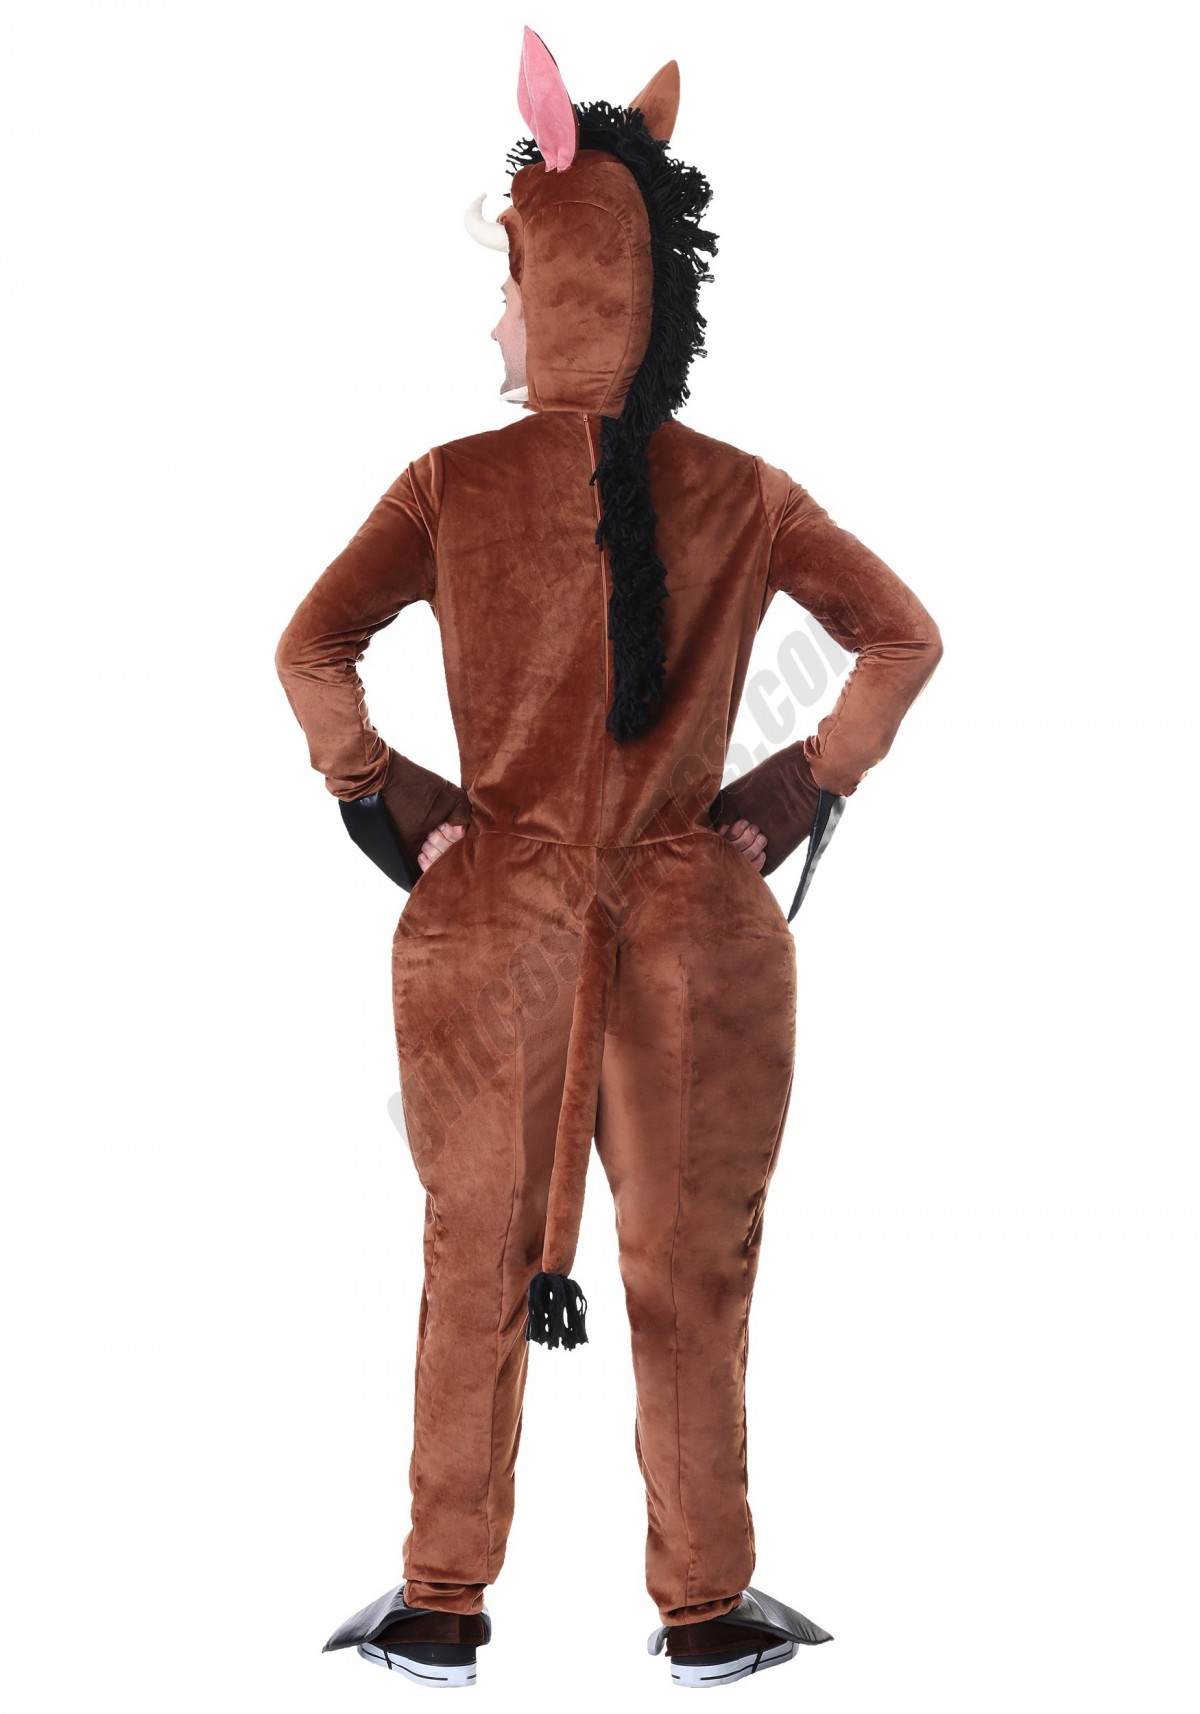 Warthog Costume for Adults - Men's - -1